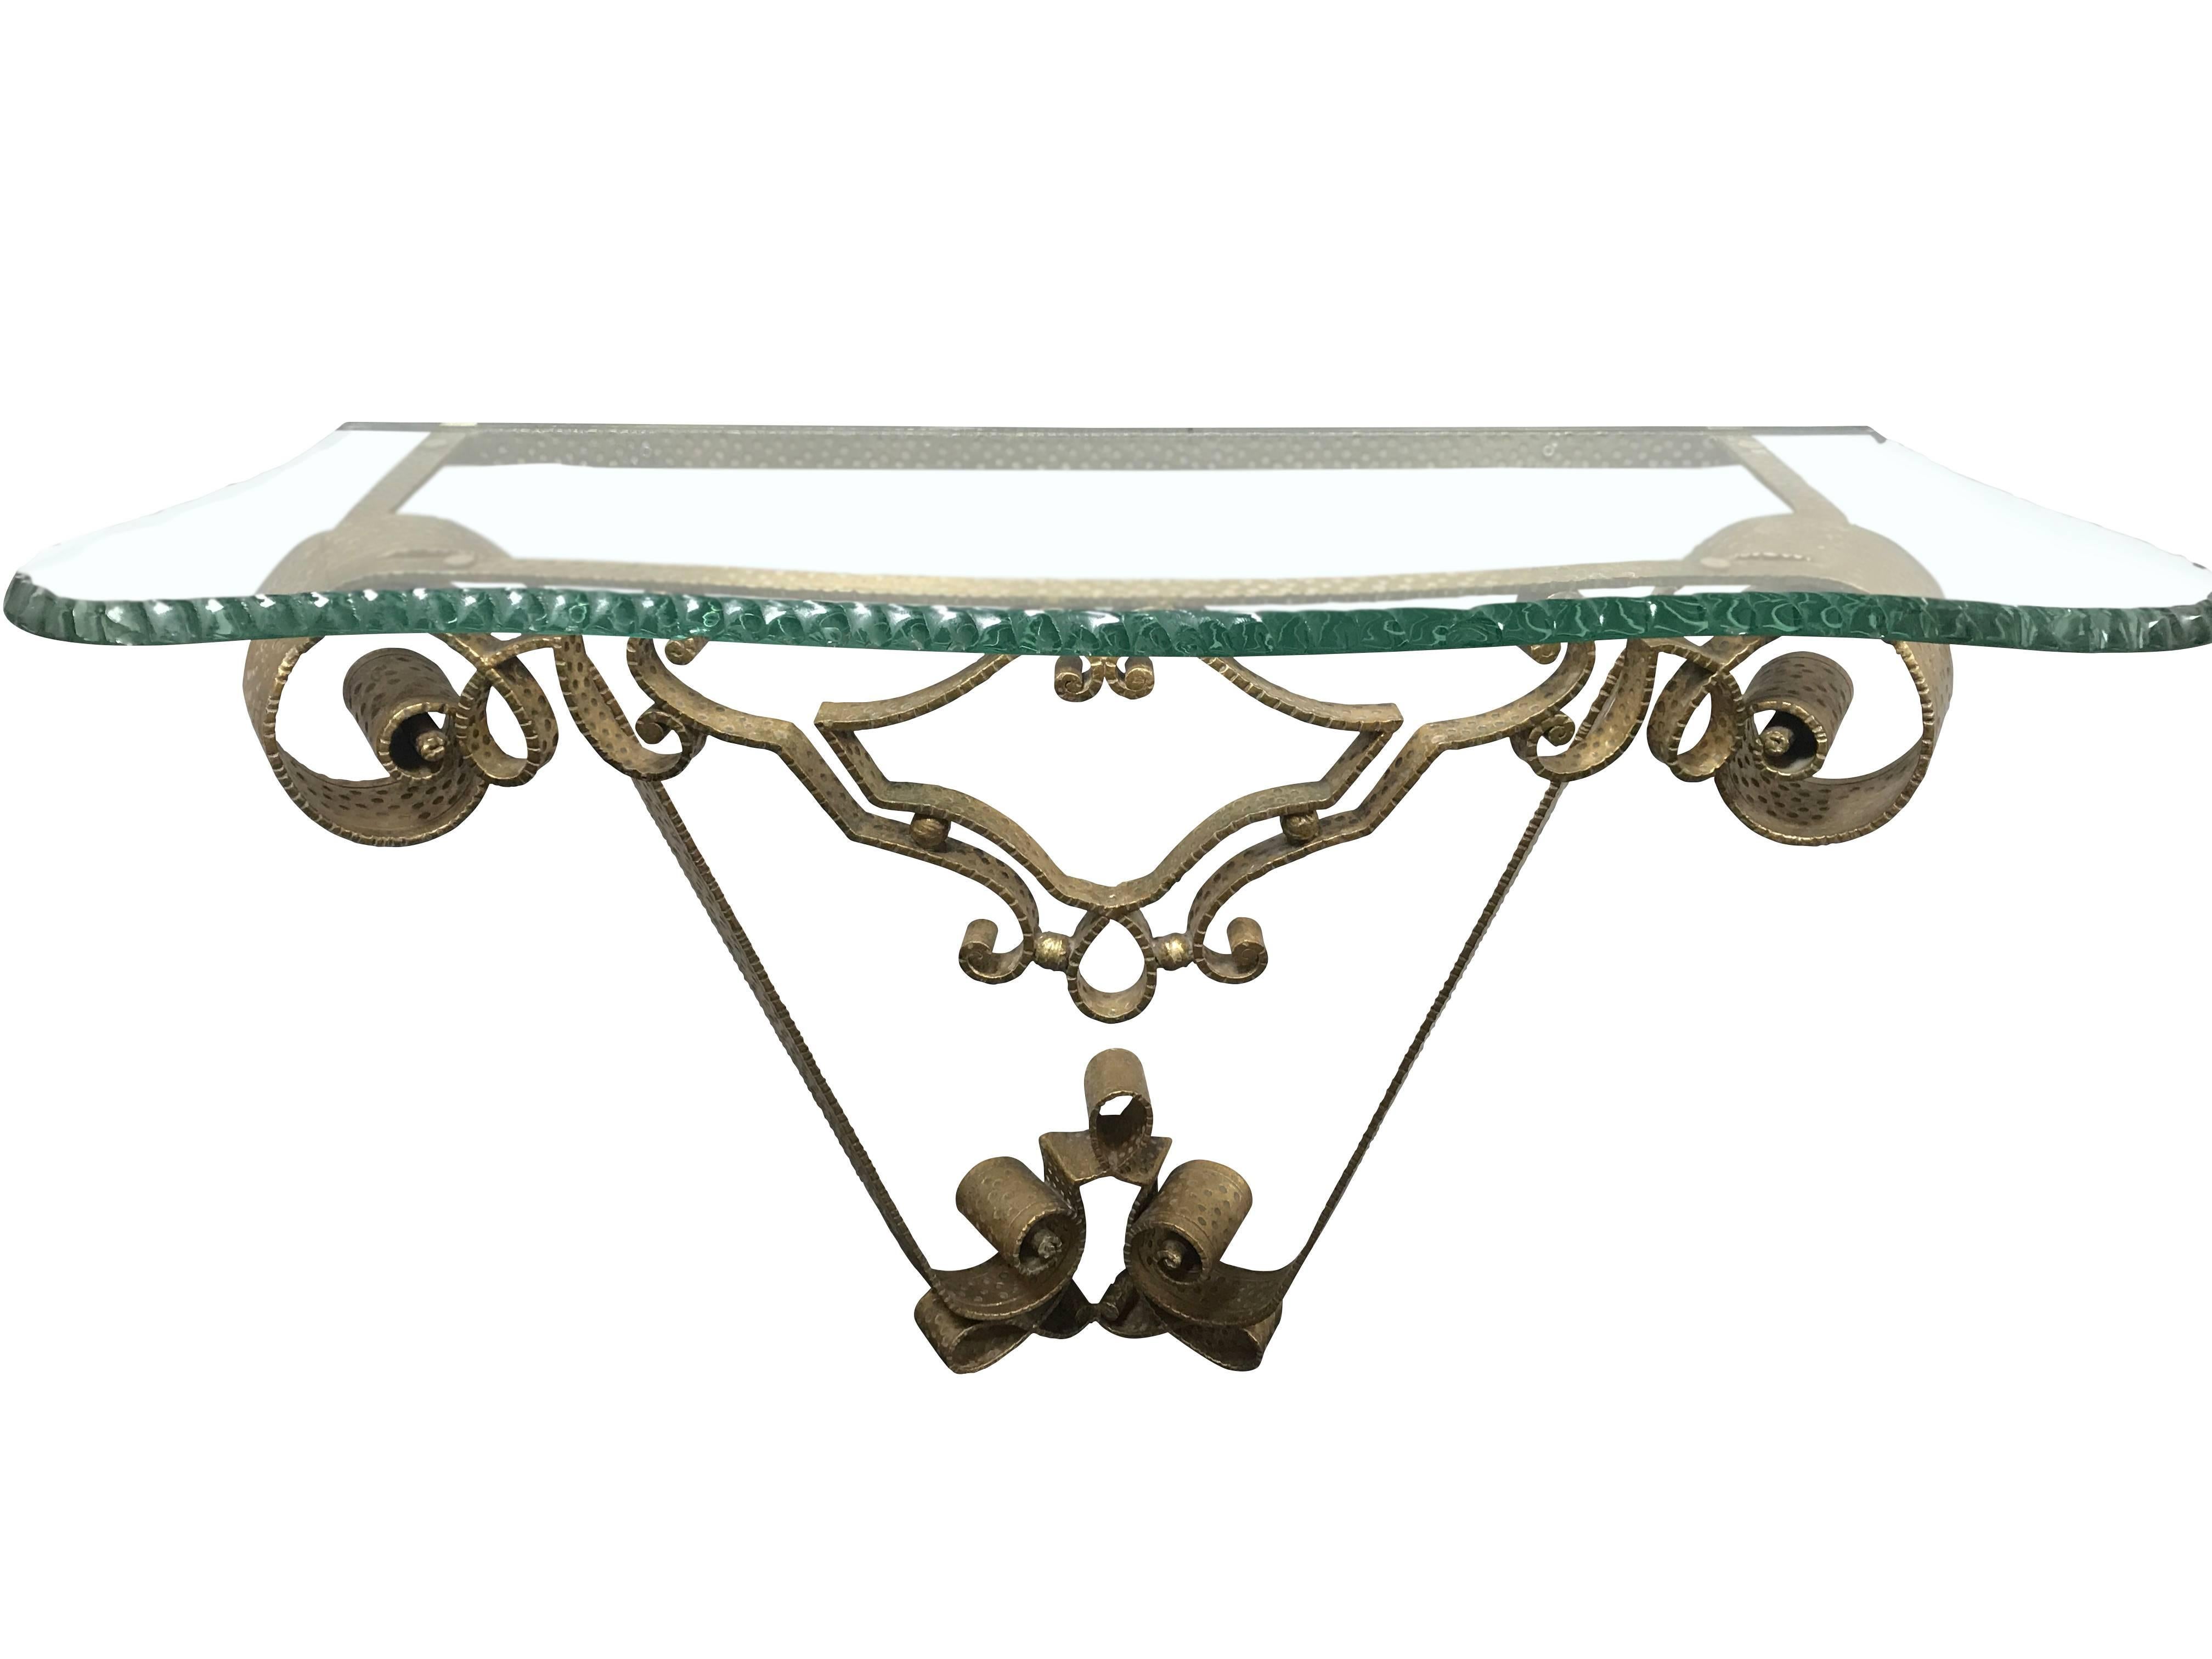 1950s Italian pair of hammered bronze console tables designed by Luigi Colli.
Top of thick chiselled glass in curved shape.
Decorative whimsical base.
Trademark Luigi Colli design pattern.
